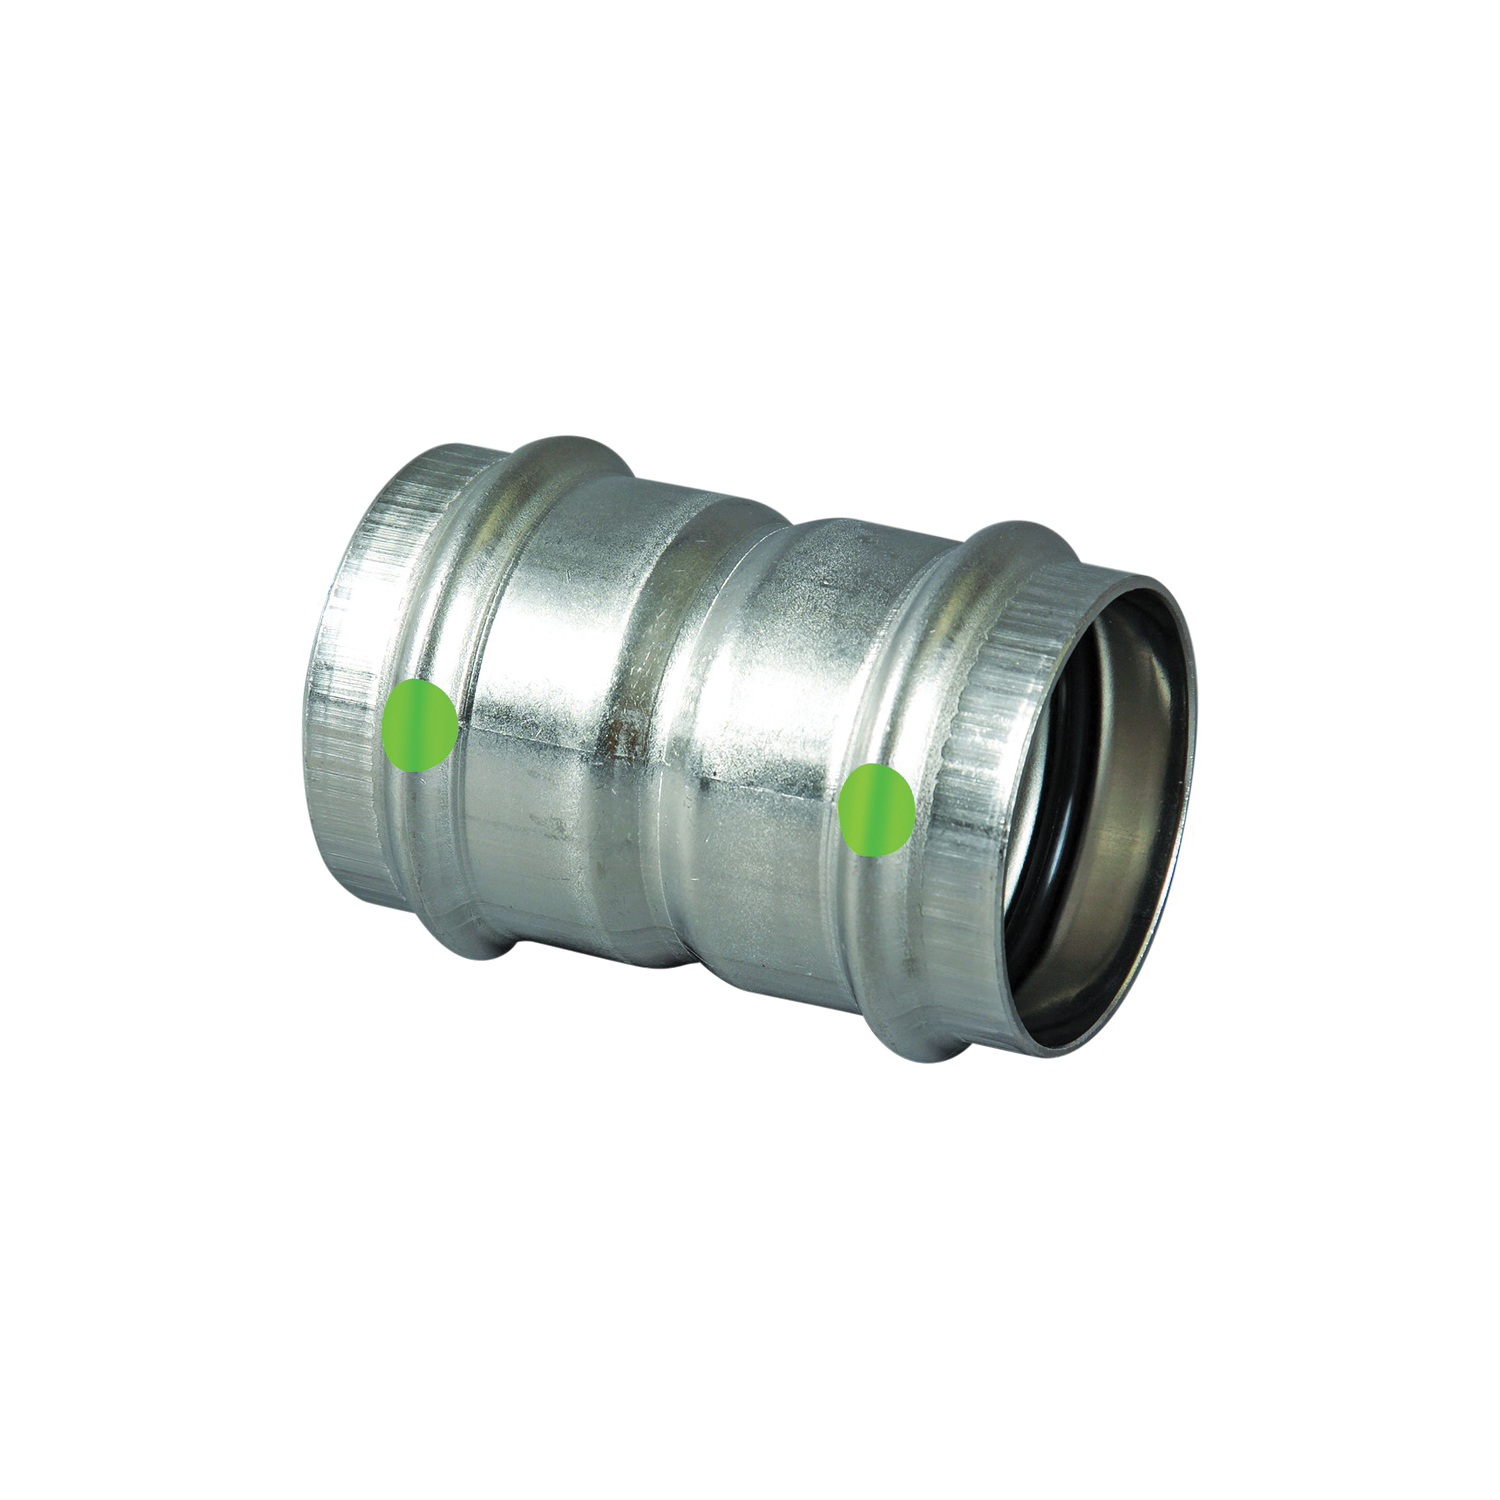 ProPress 316 Stainless Steel Pipe Coupling With Stop